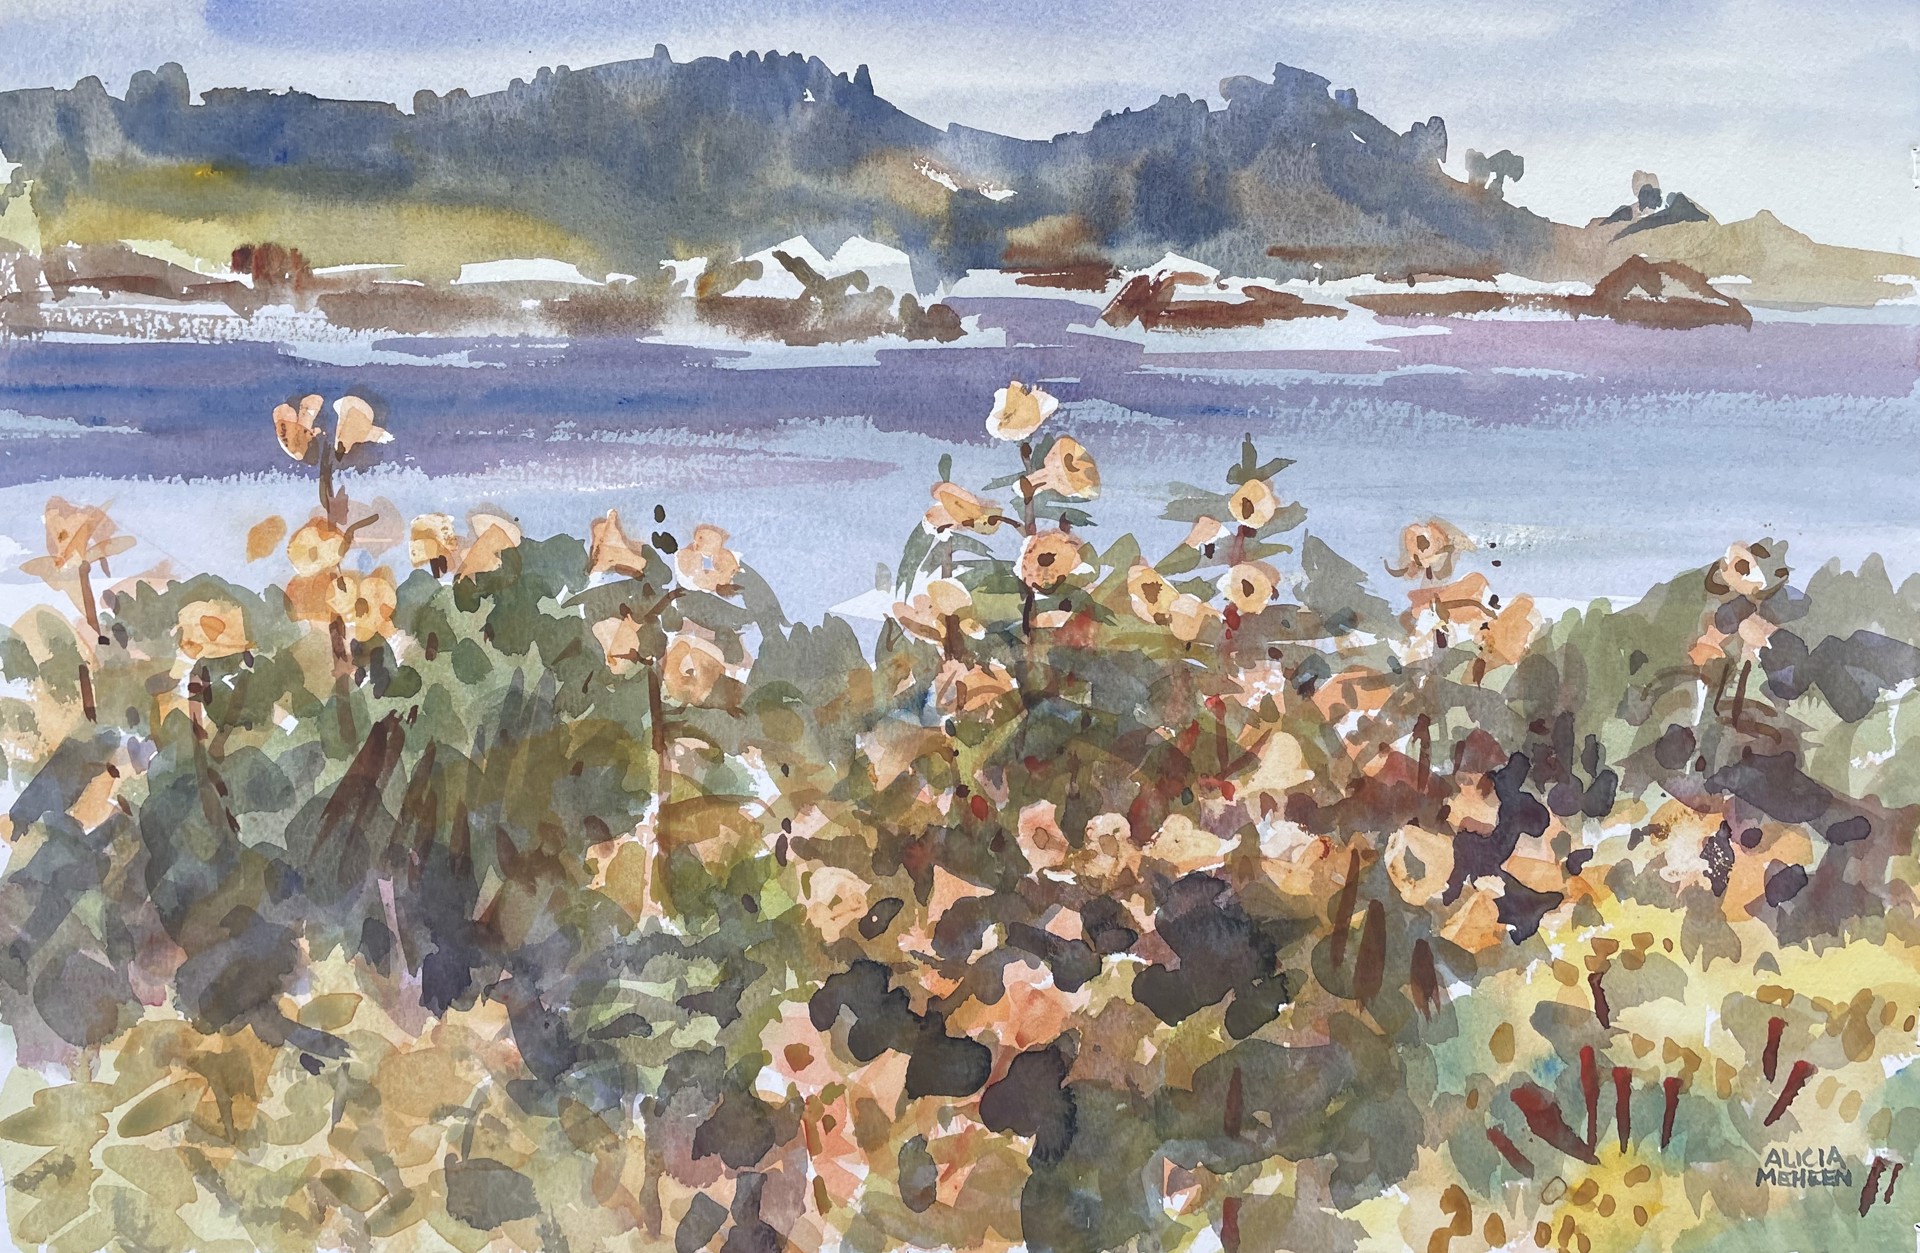 Pt Lobos with Sticky Monkey by Alicia Meheen